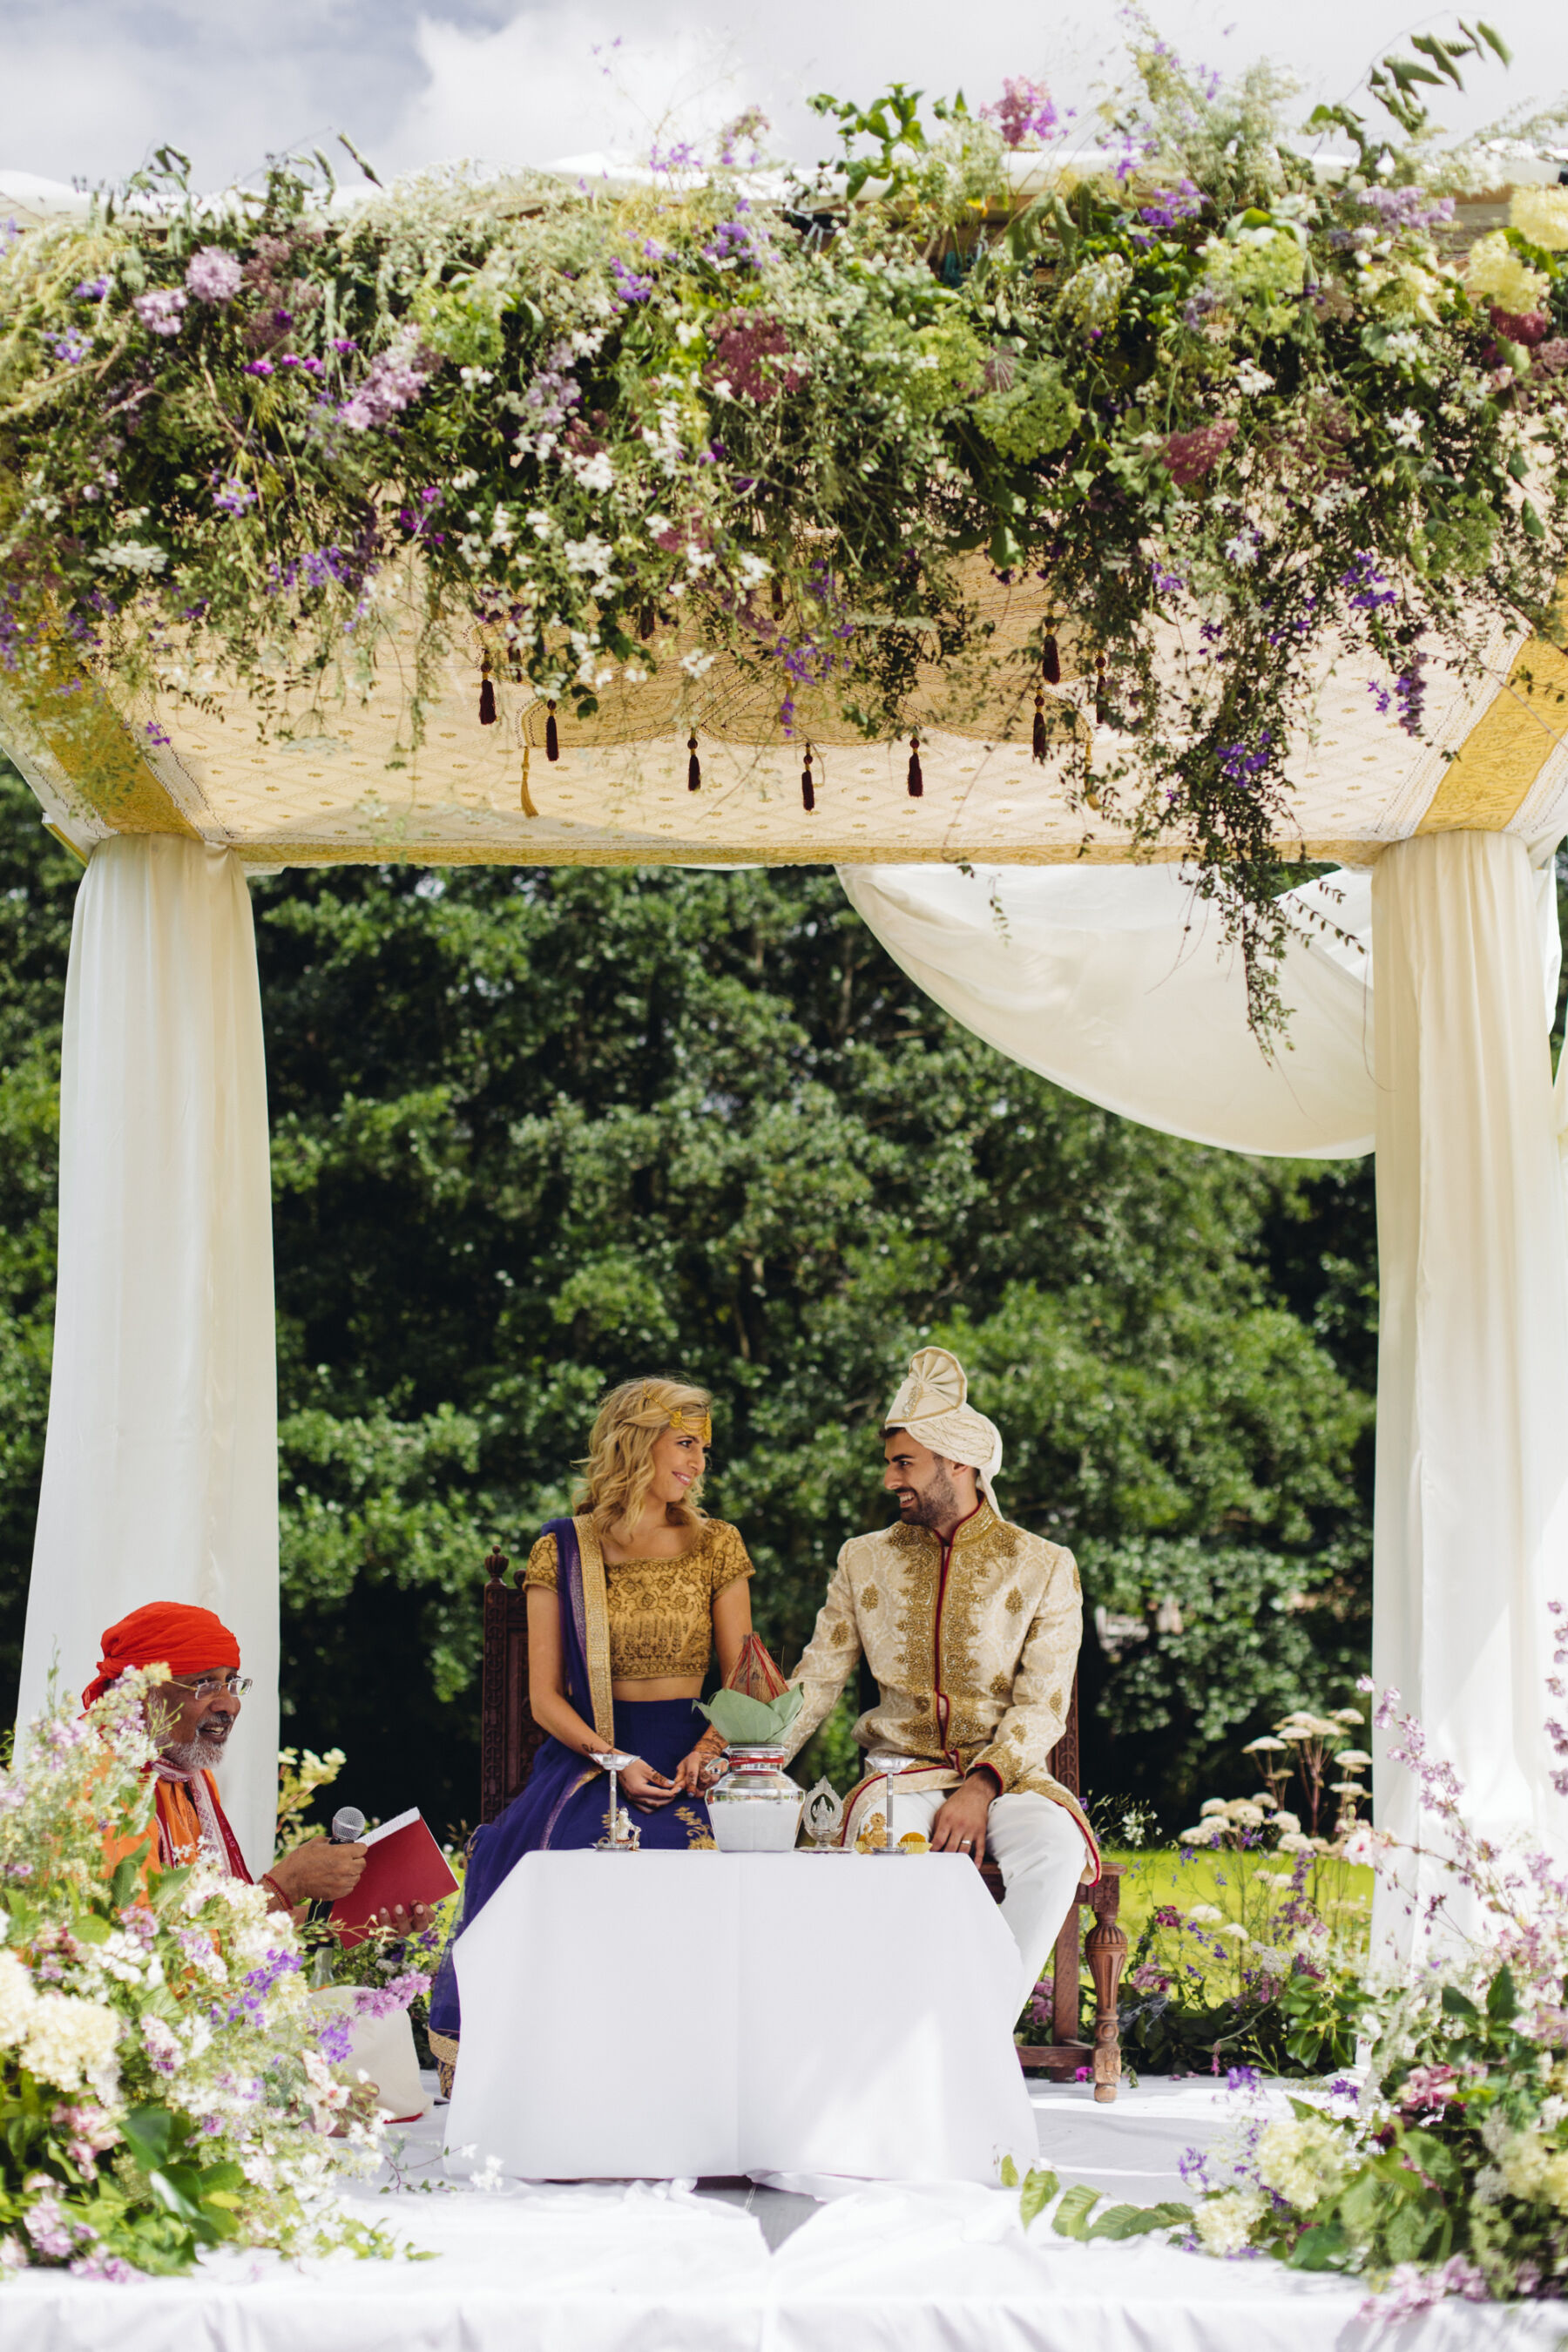 Asian wedding at Dewsall Court, country house wedding venue in Herefordshire